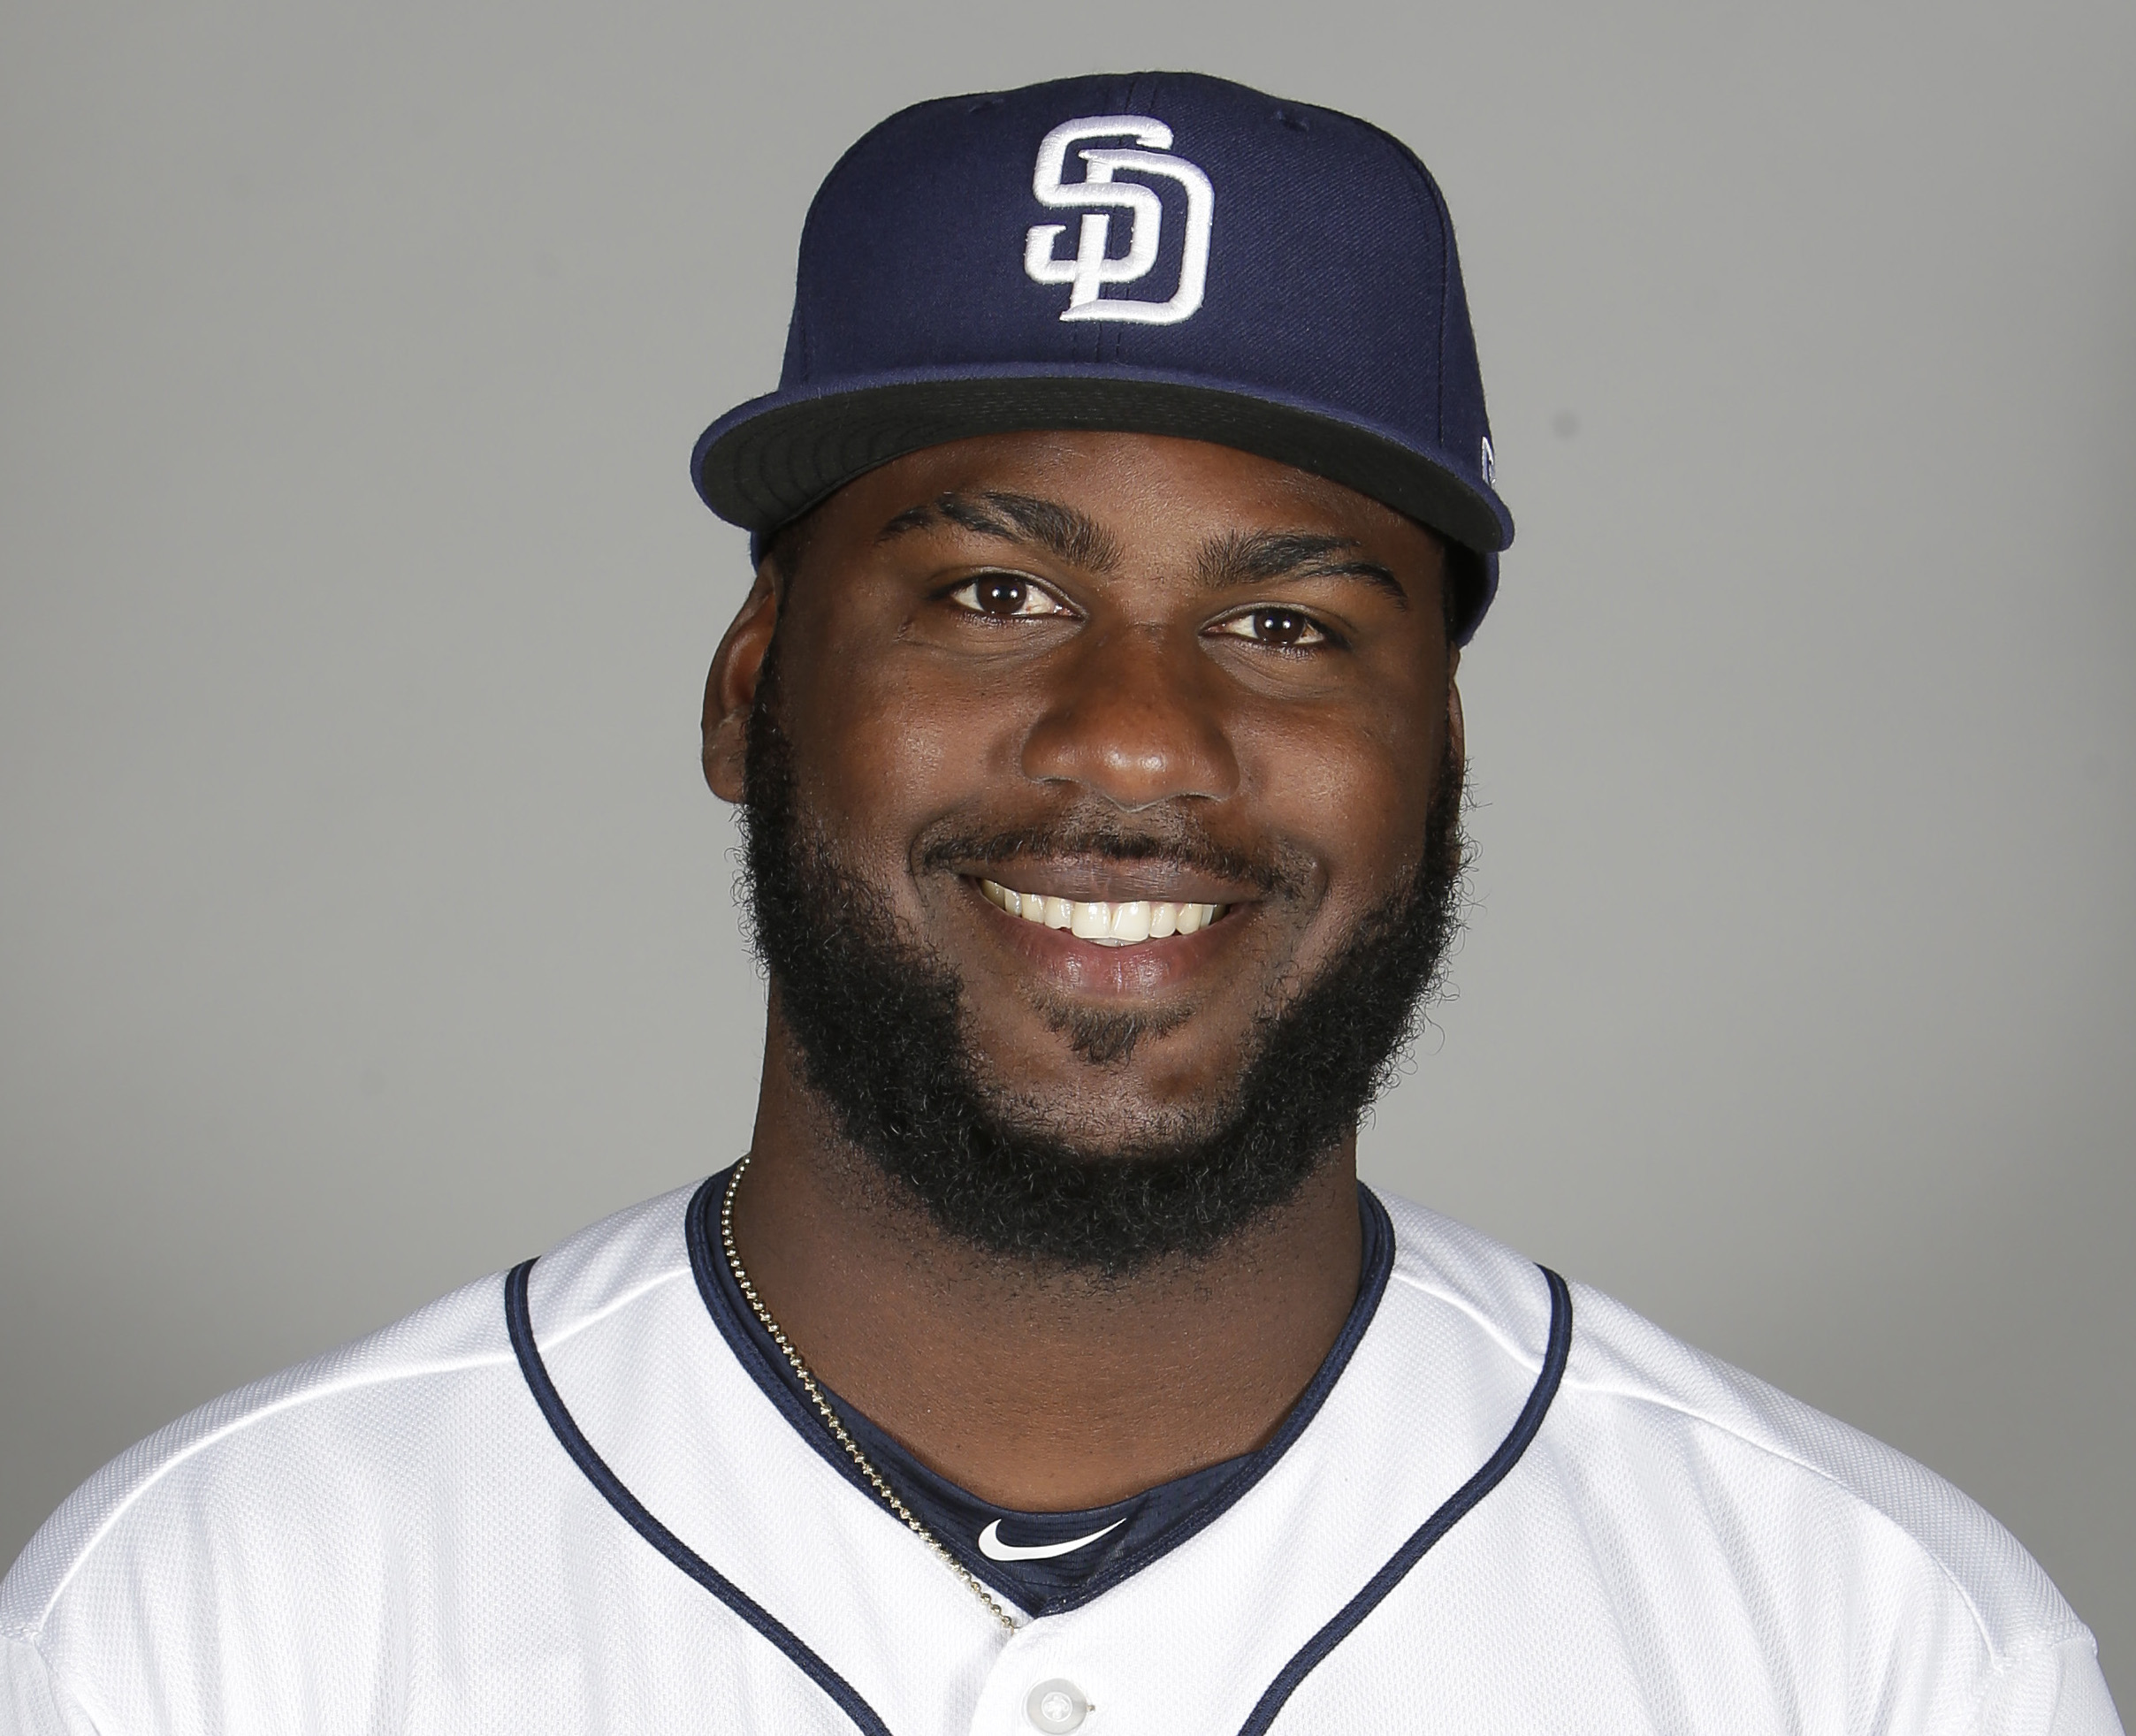 Alert: The Padres now have dudes named Franchy and Franmil